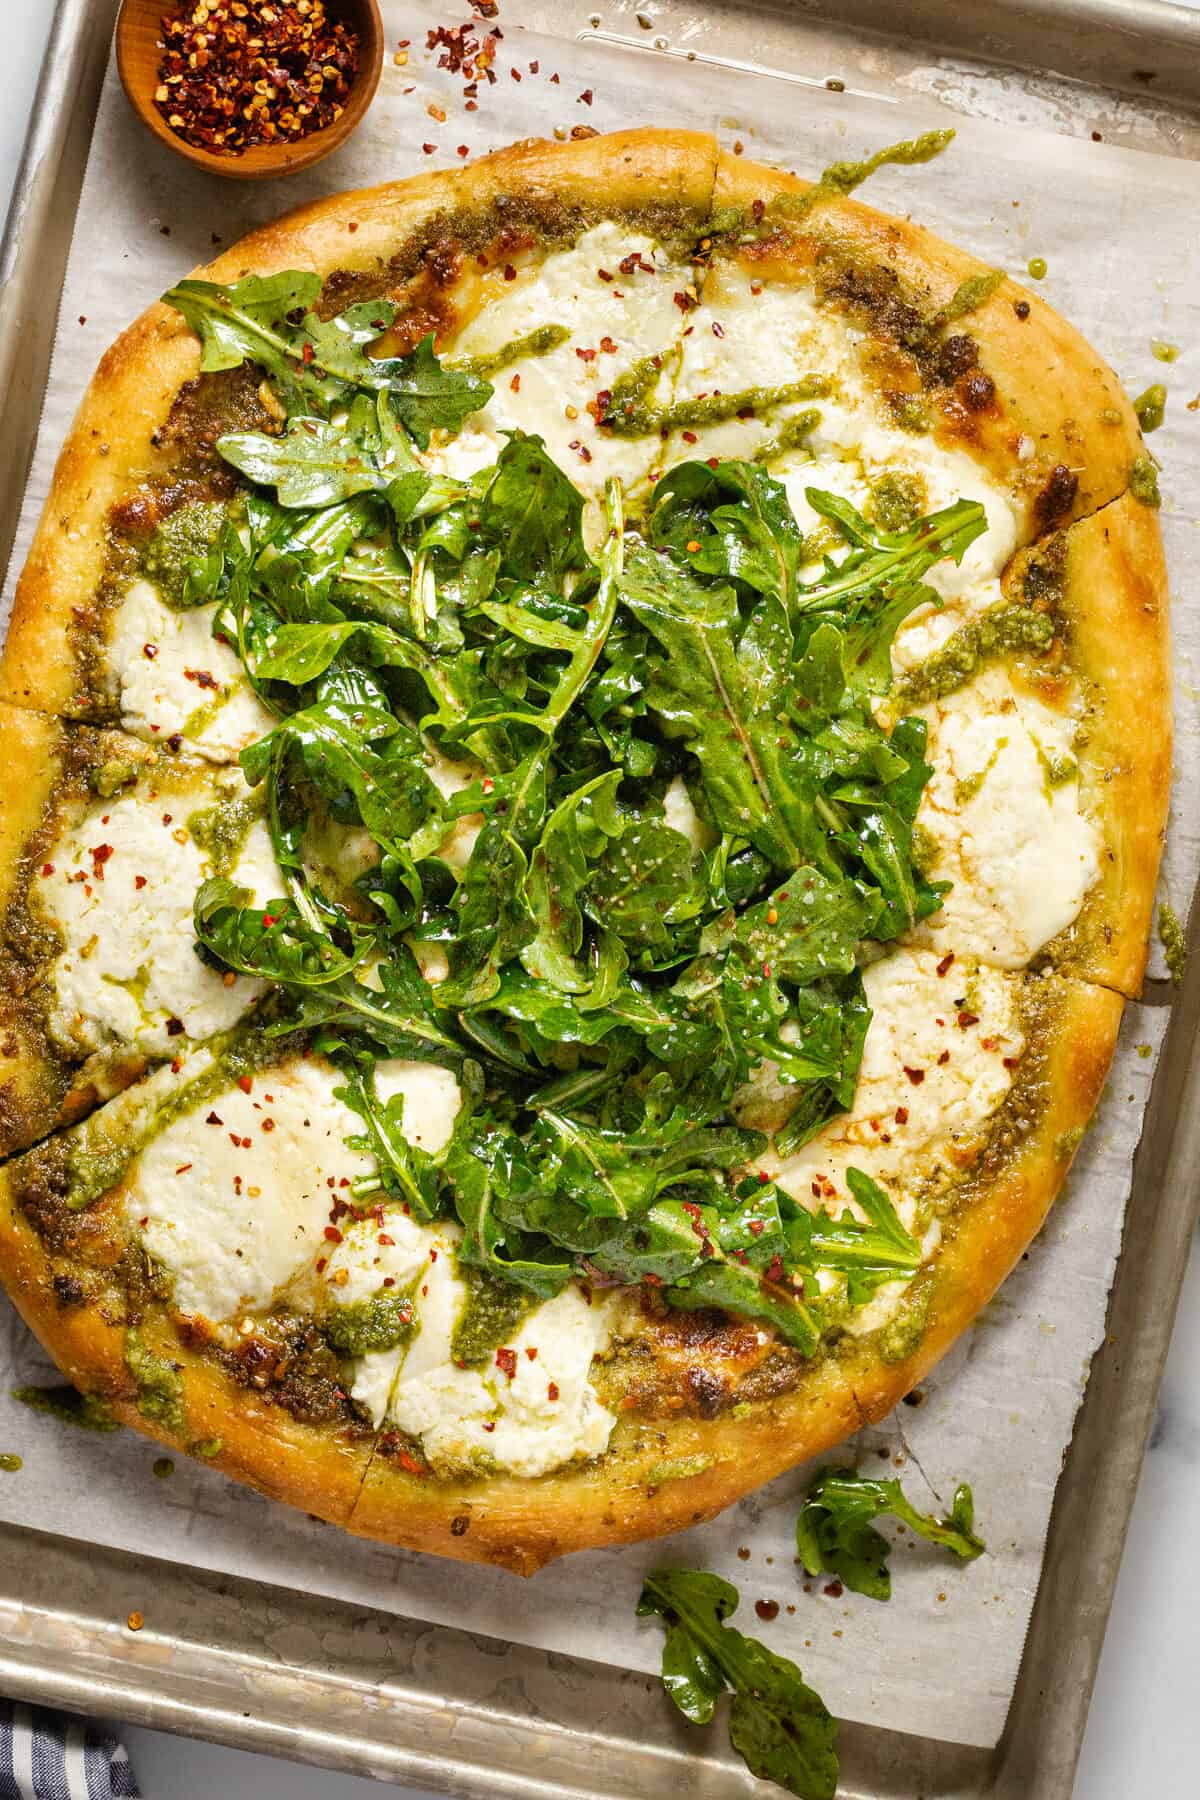 Parchment lined baking sheet with homemade burrata pizza garnished with arugula